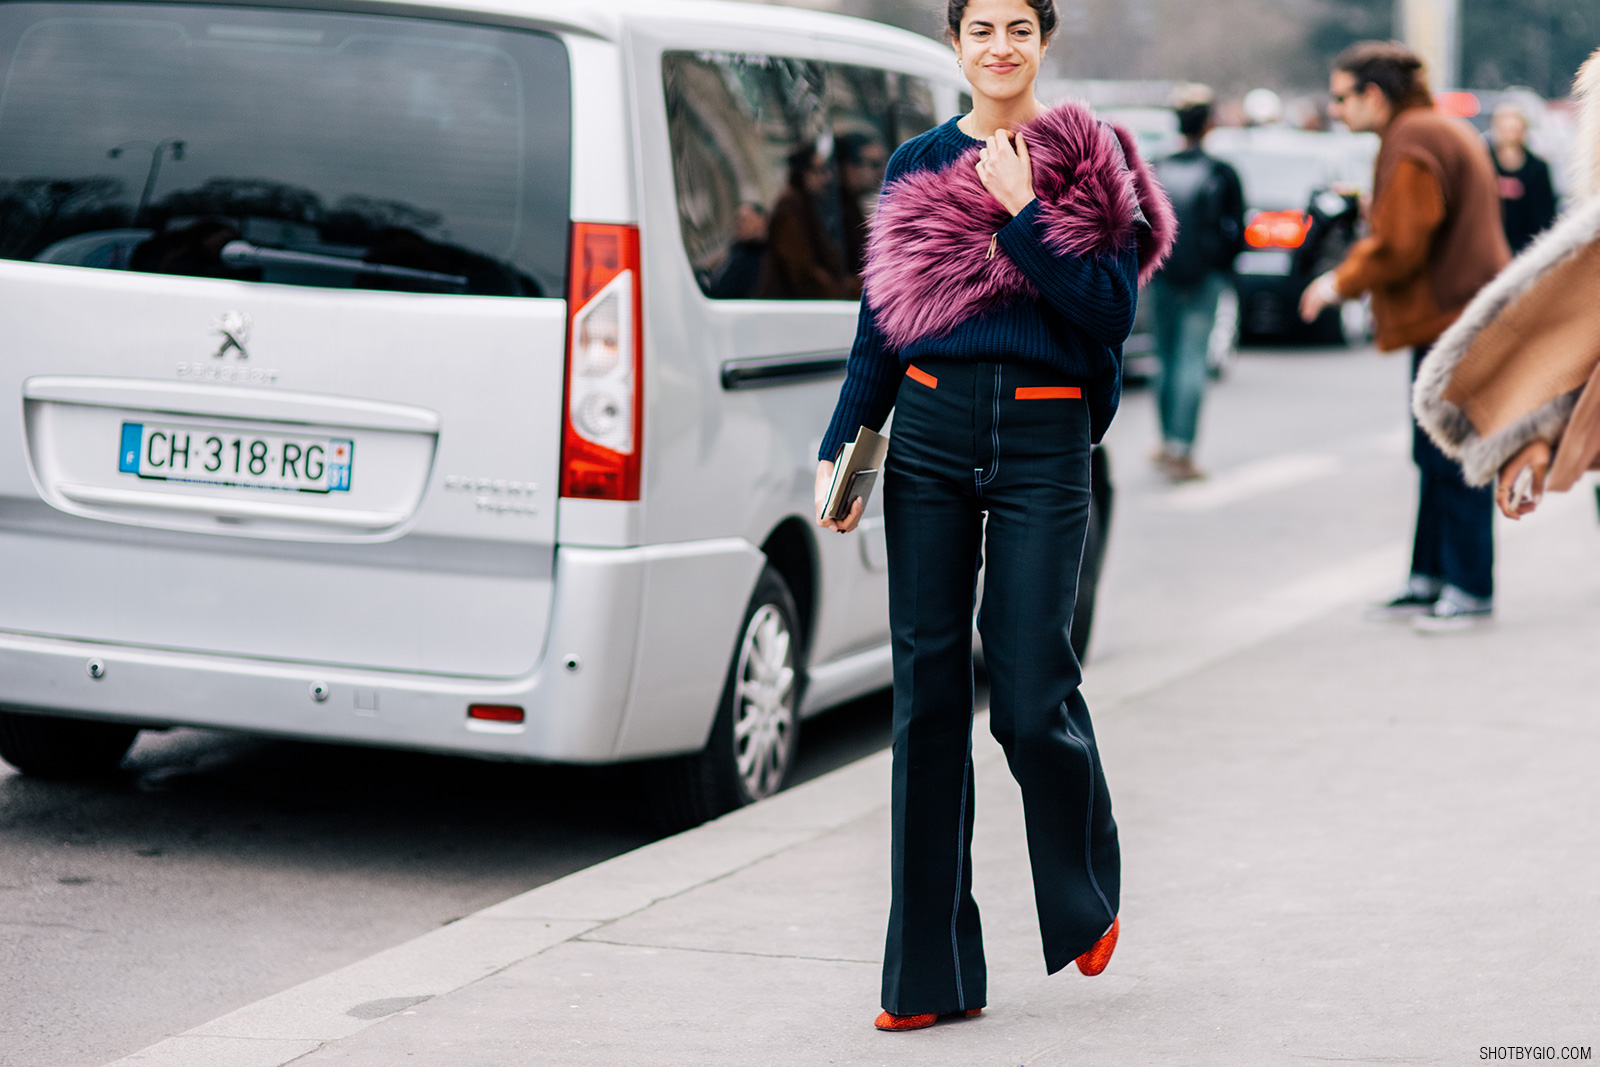 Leandra Medine (The Man Repeller) before the Chanel Fall 2015 Fashion Show in Paris, France